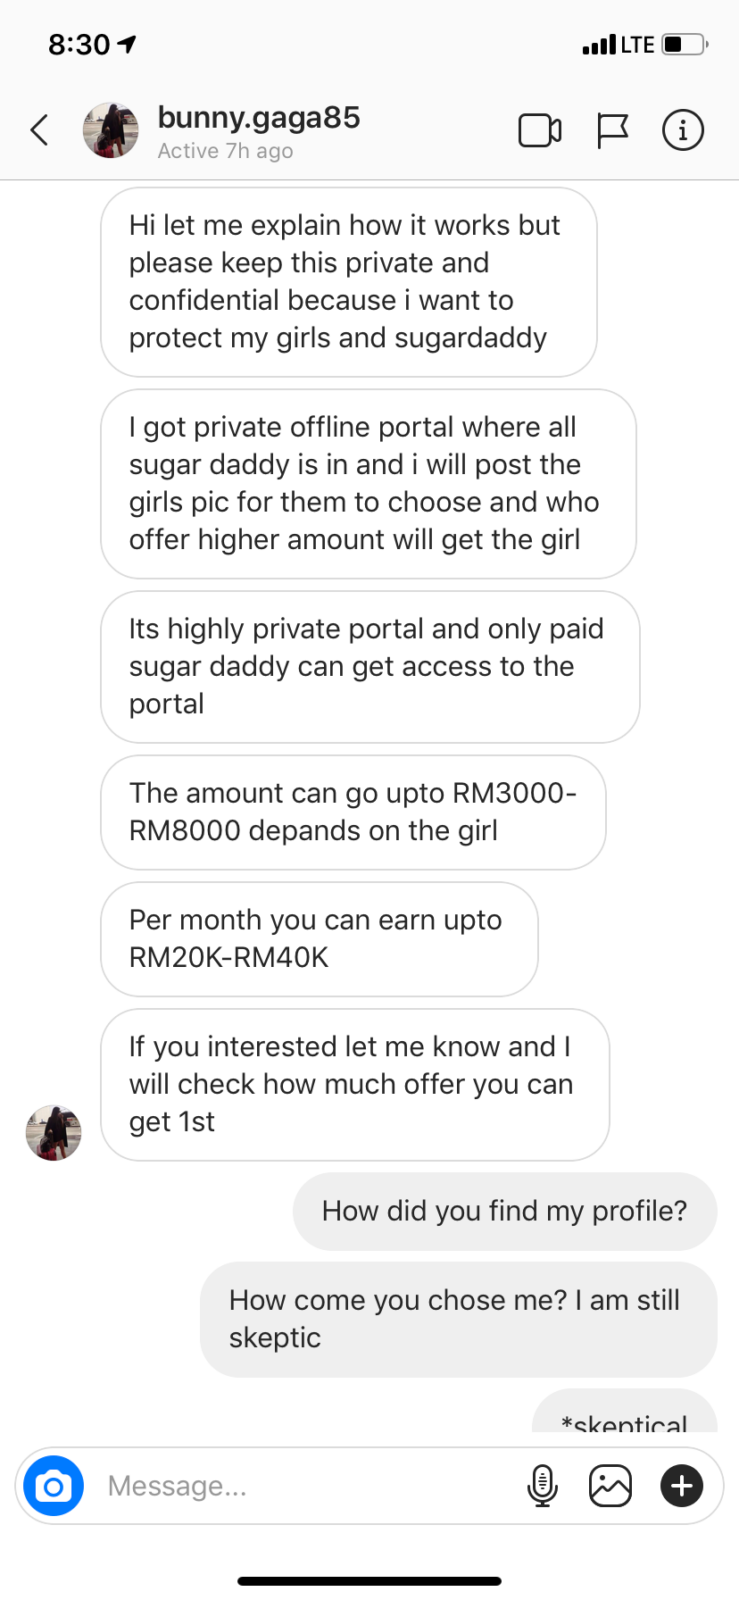 A Sugar Daddy Agent Messaged Me on Instagram and Said I Could Earn RM40,000 A Month - WORLD OF BUZZ 9